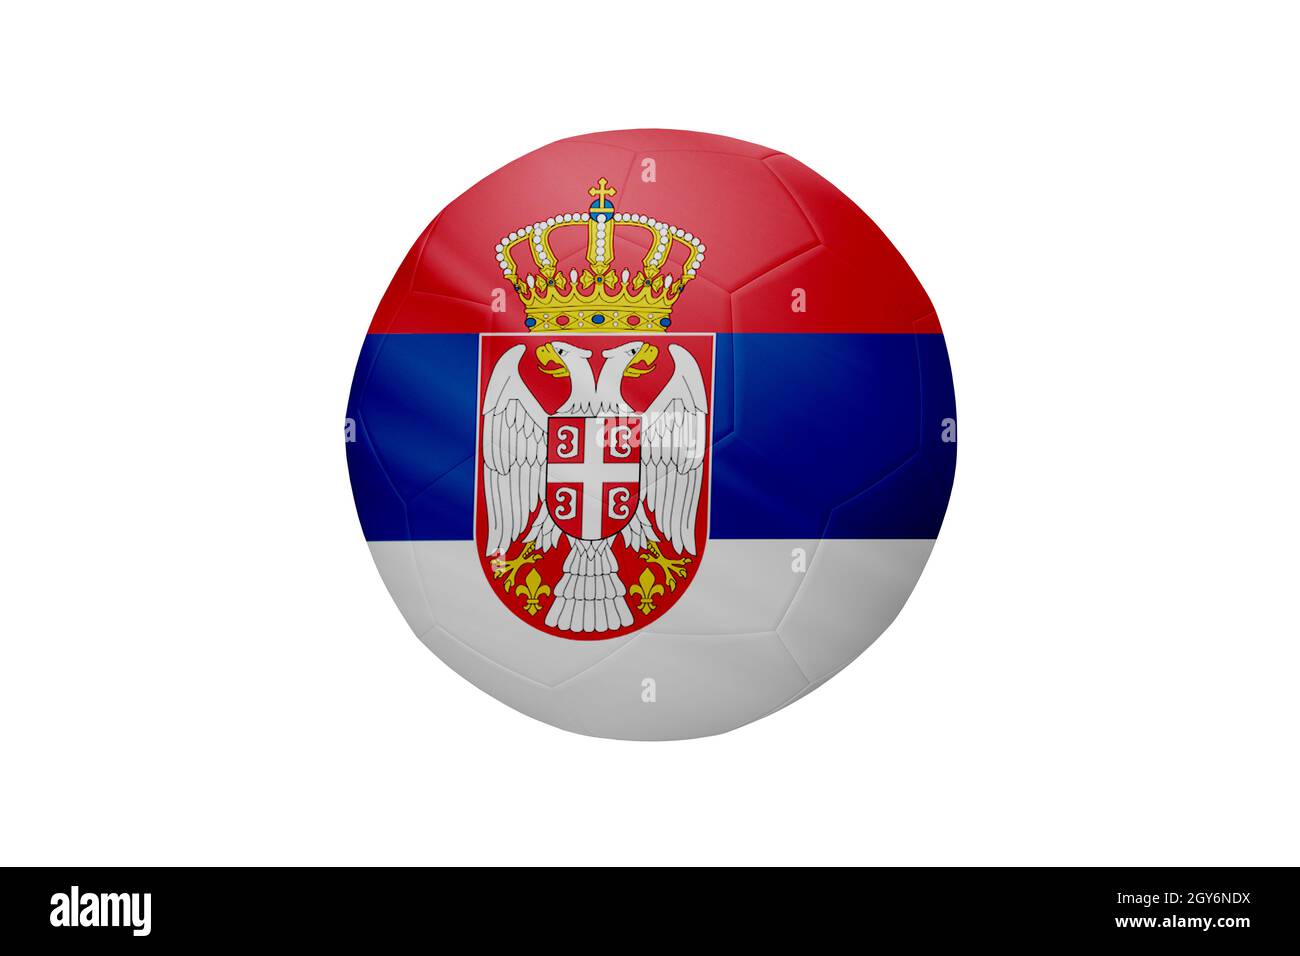 Football in the colors of the Serbia flag isolated on white background. In a conceptual championship image supporting Serbia. Stock Photo